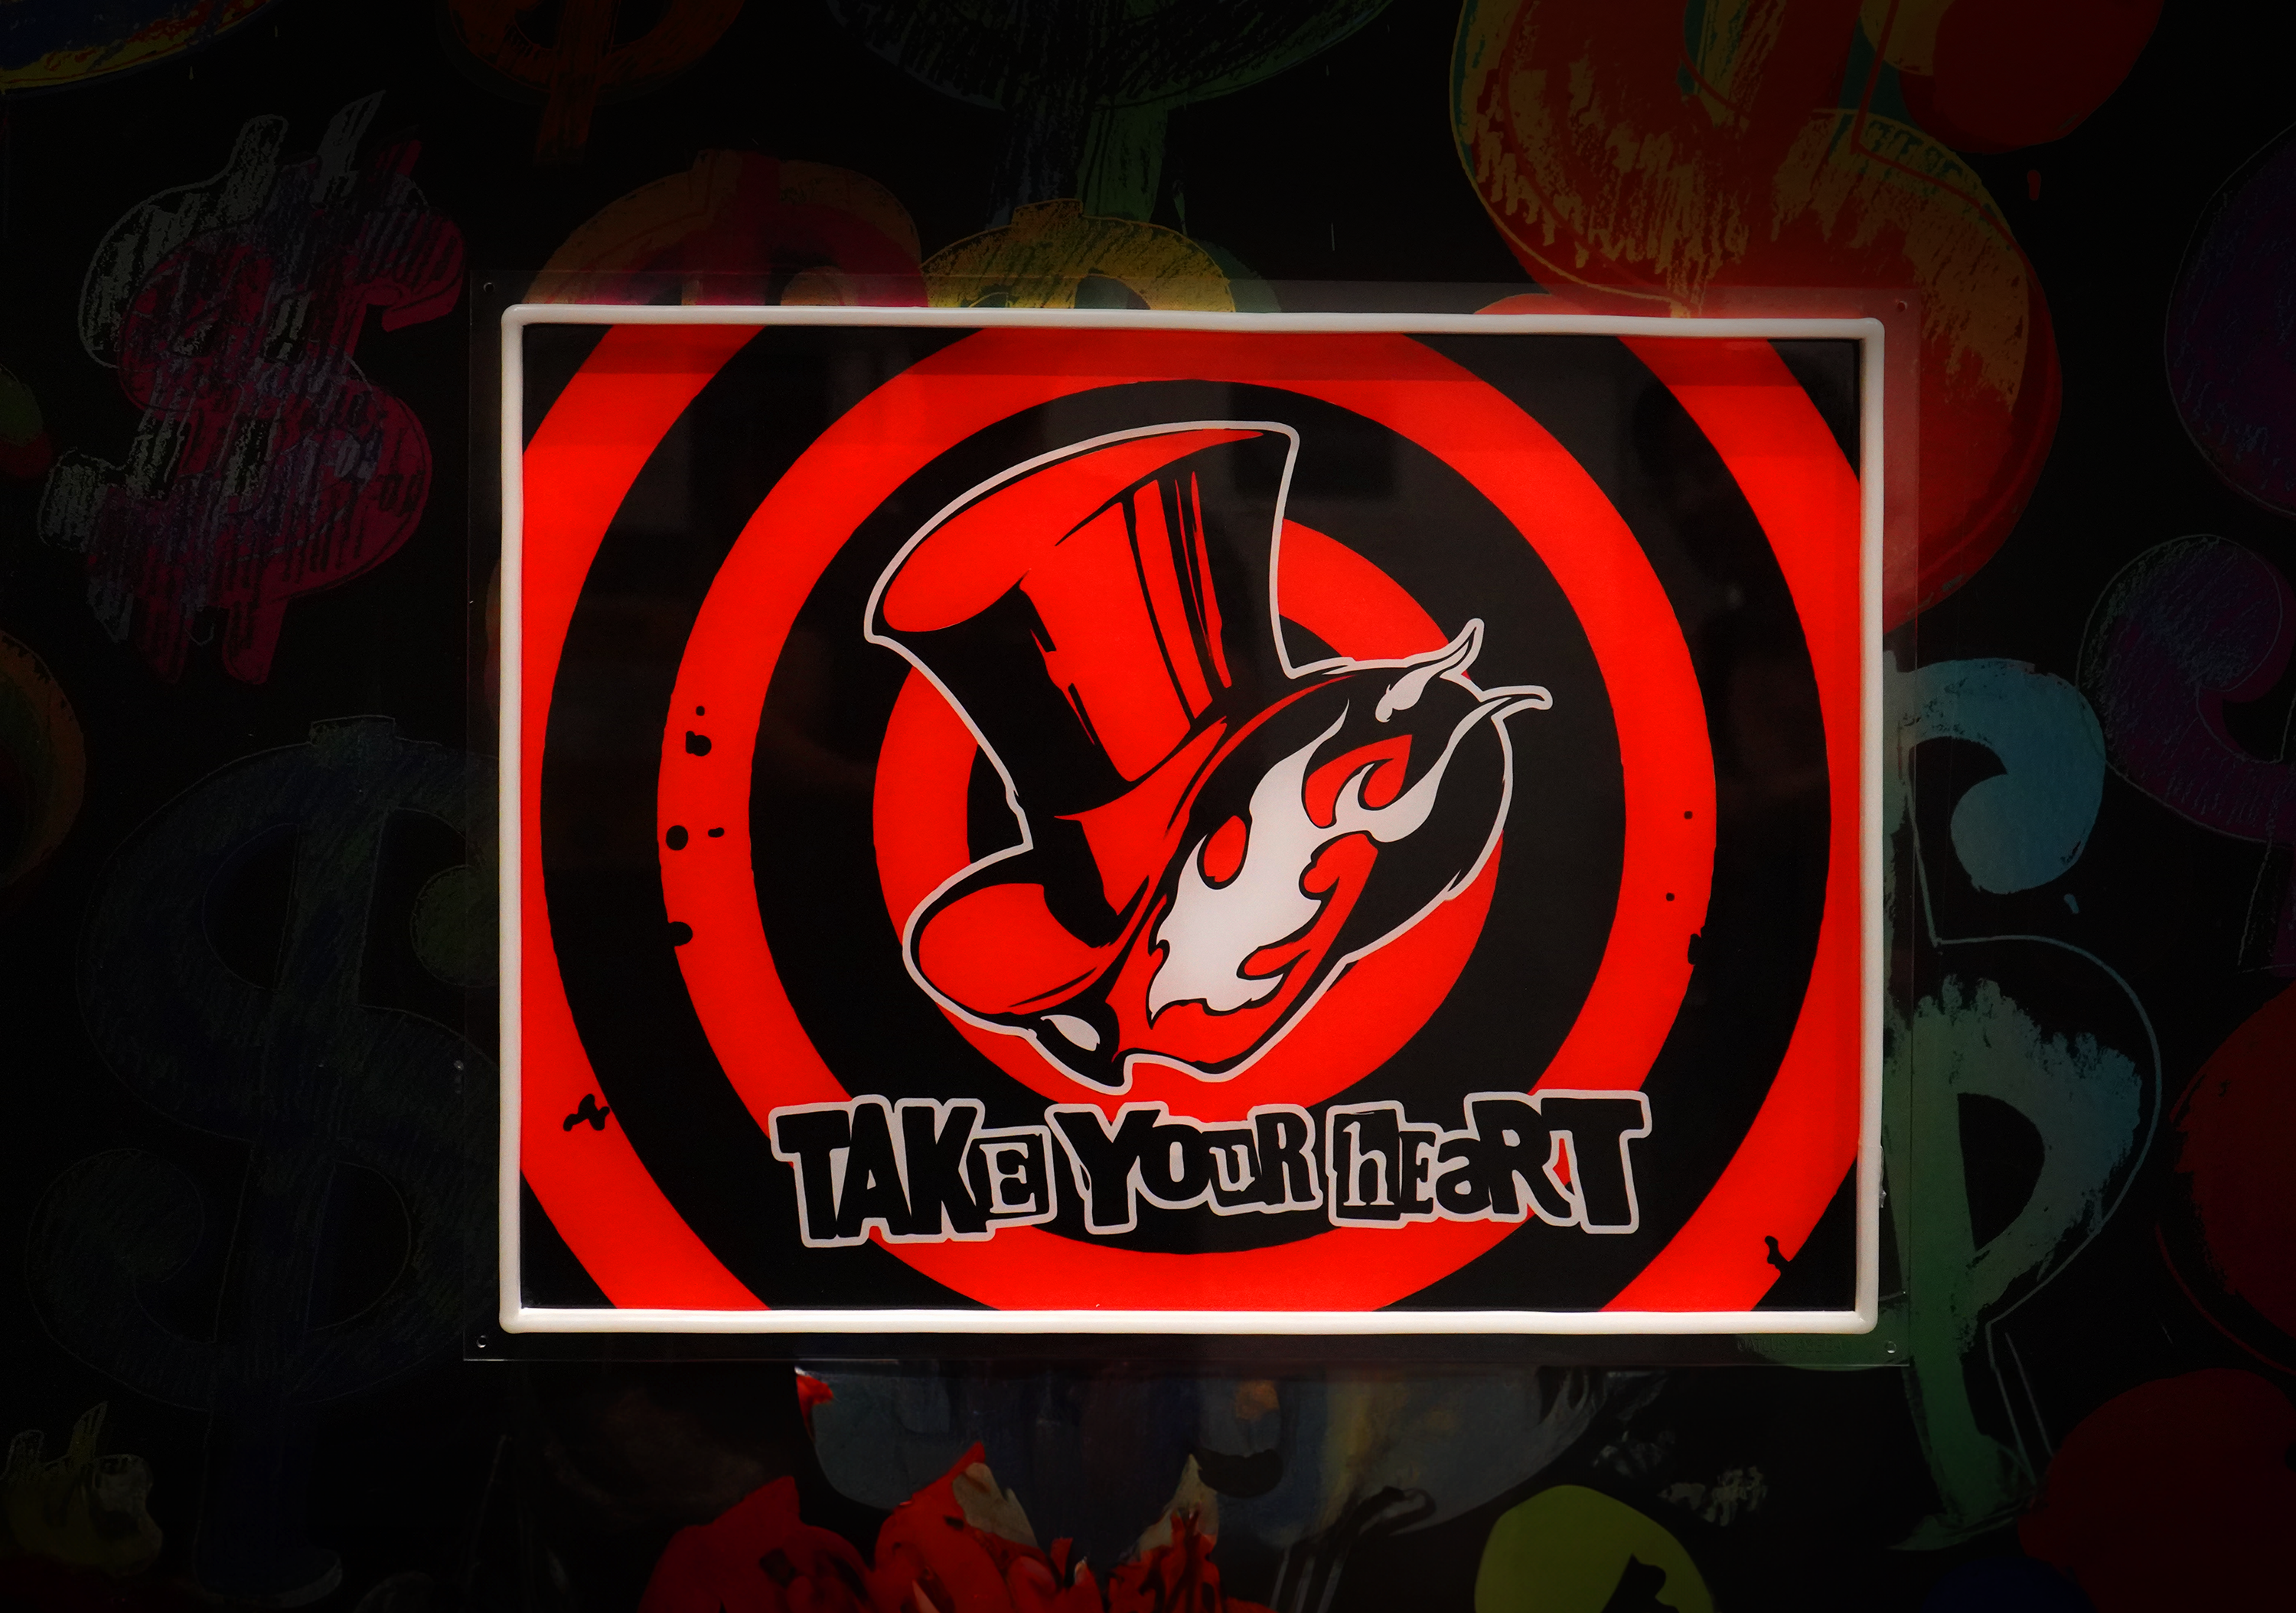 Calling Card Neon LED Poster 2FT (Persona 5 Royal)